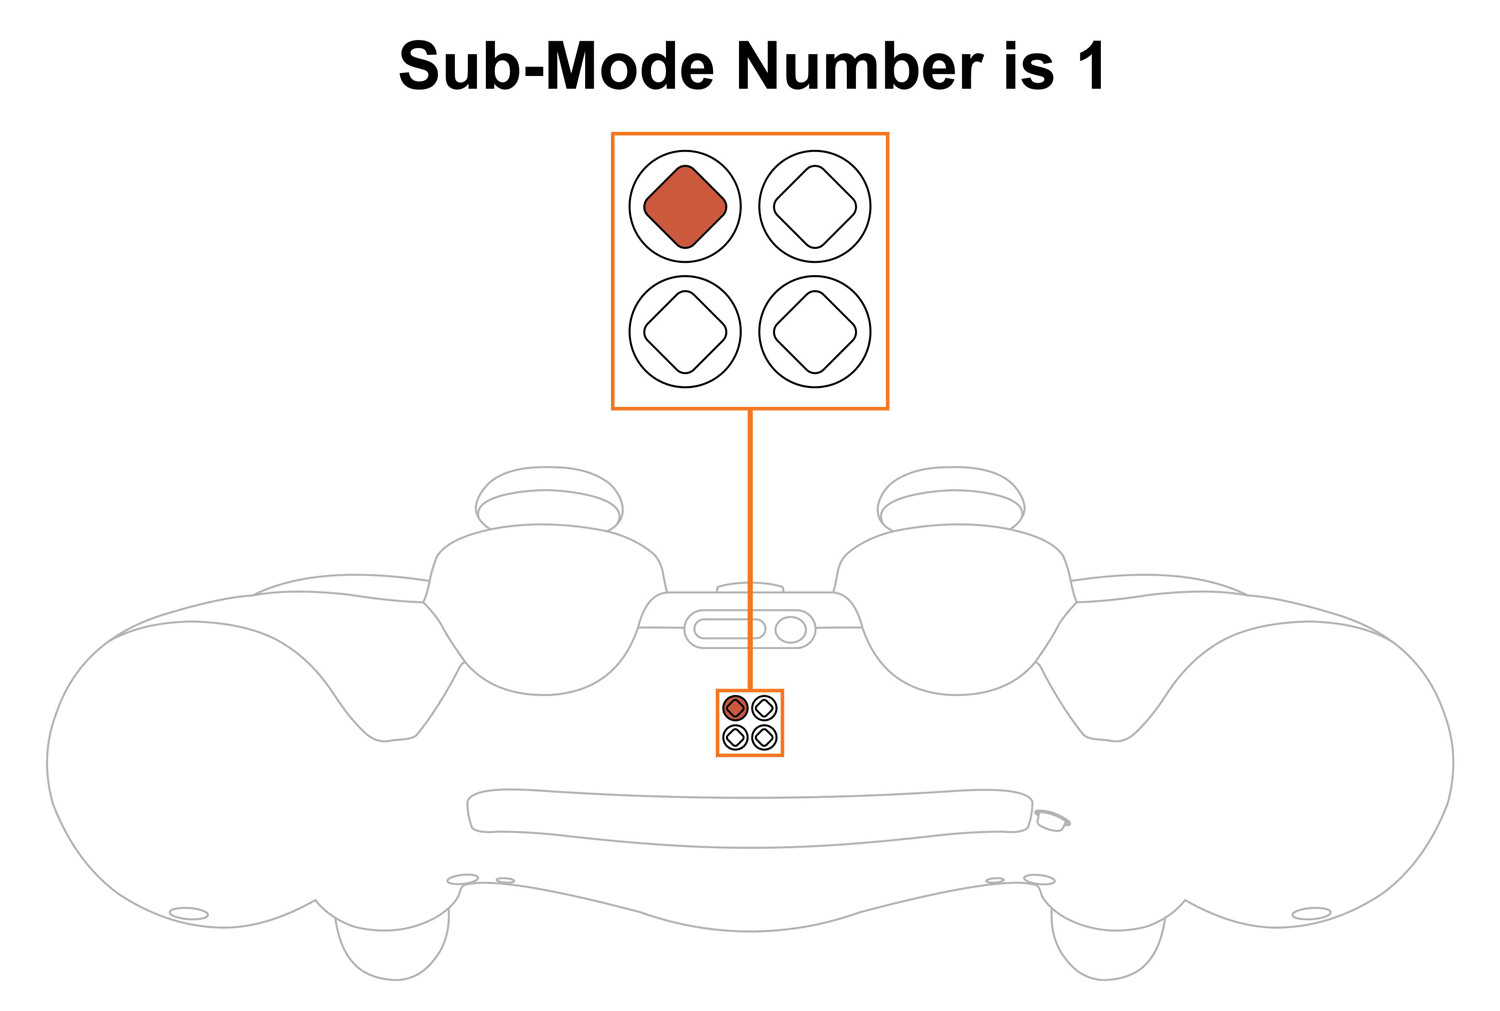 How To Check Current Jitter Sub-mode